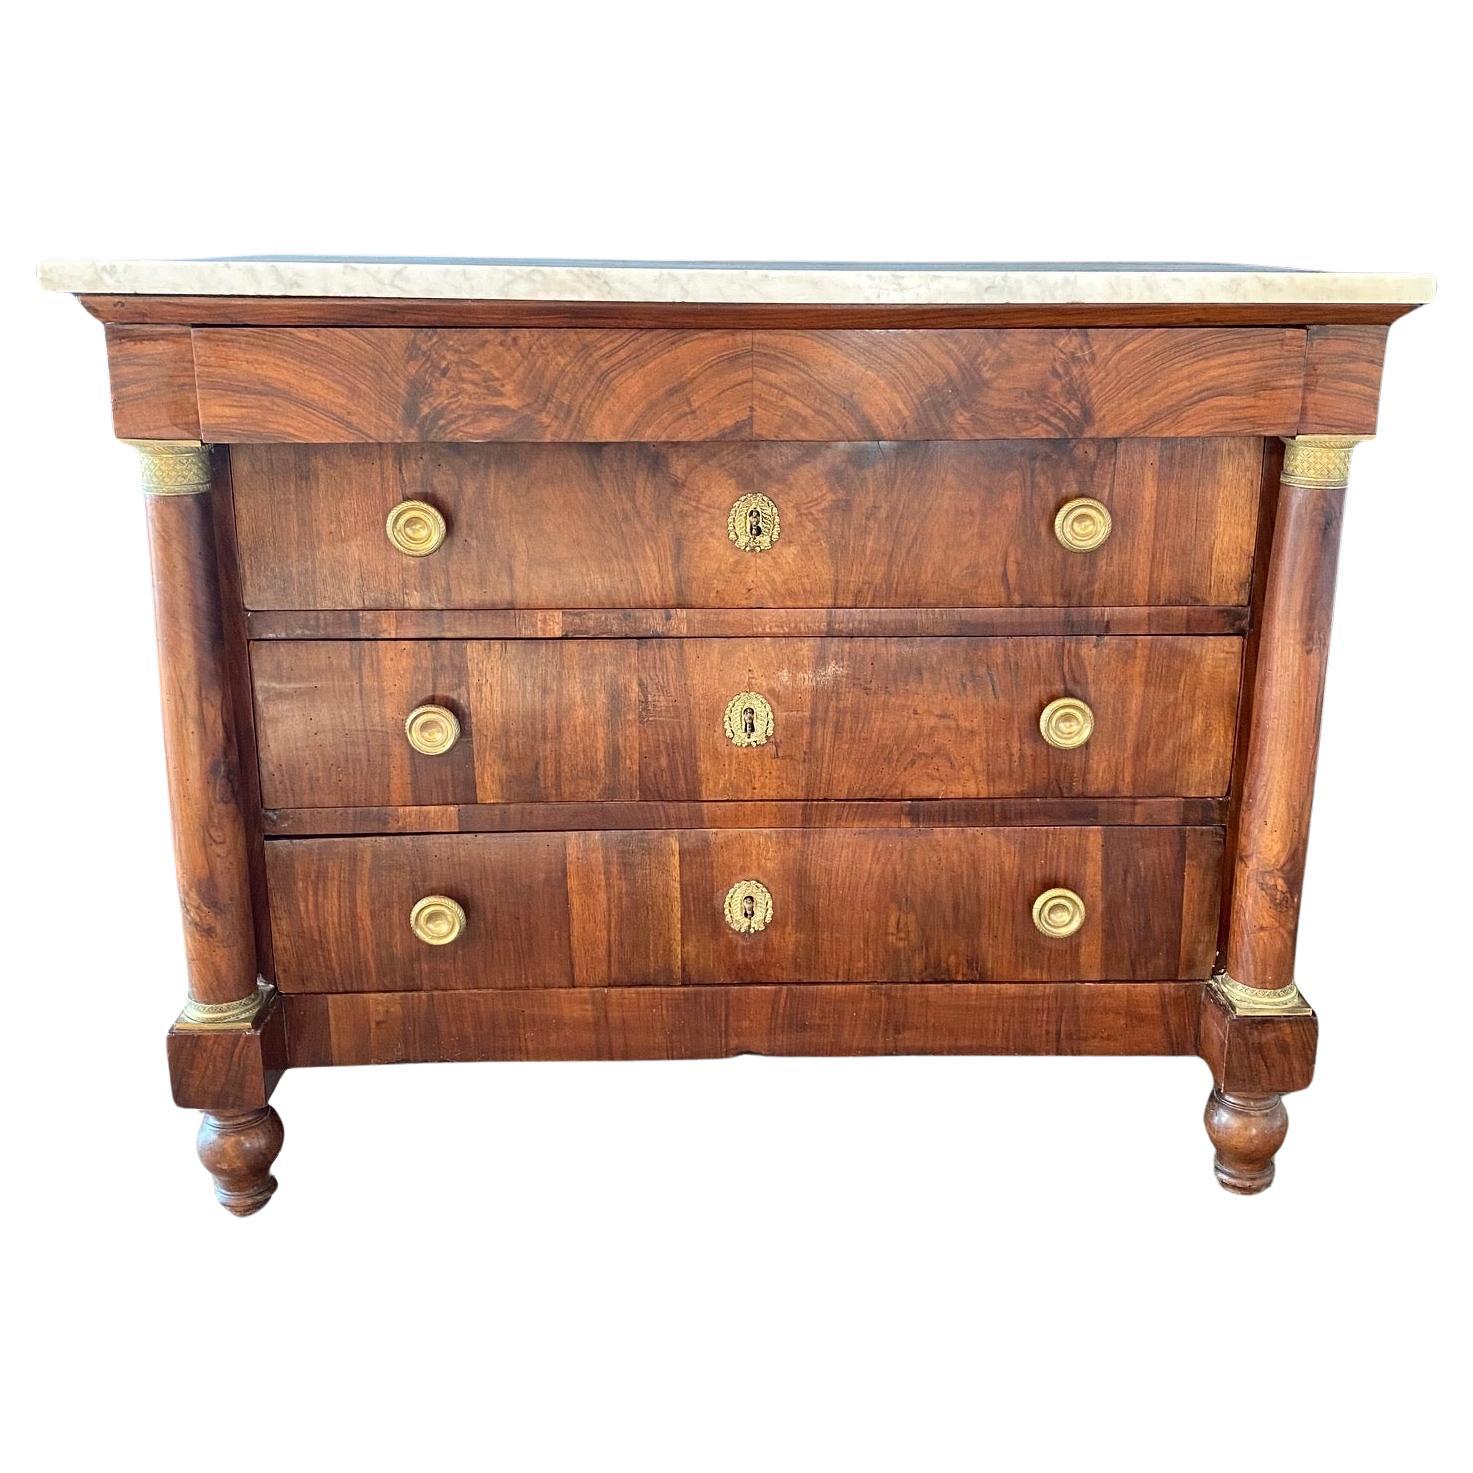 19th Century French Neoclassical Marble Top Commode or Chest of Drawers 